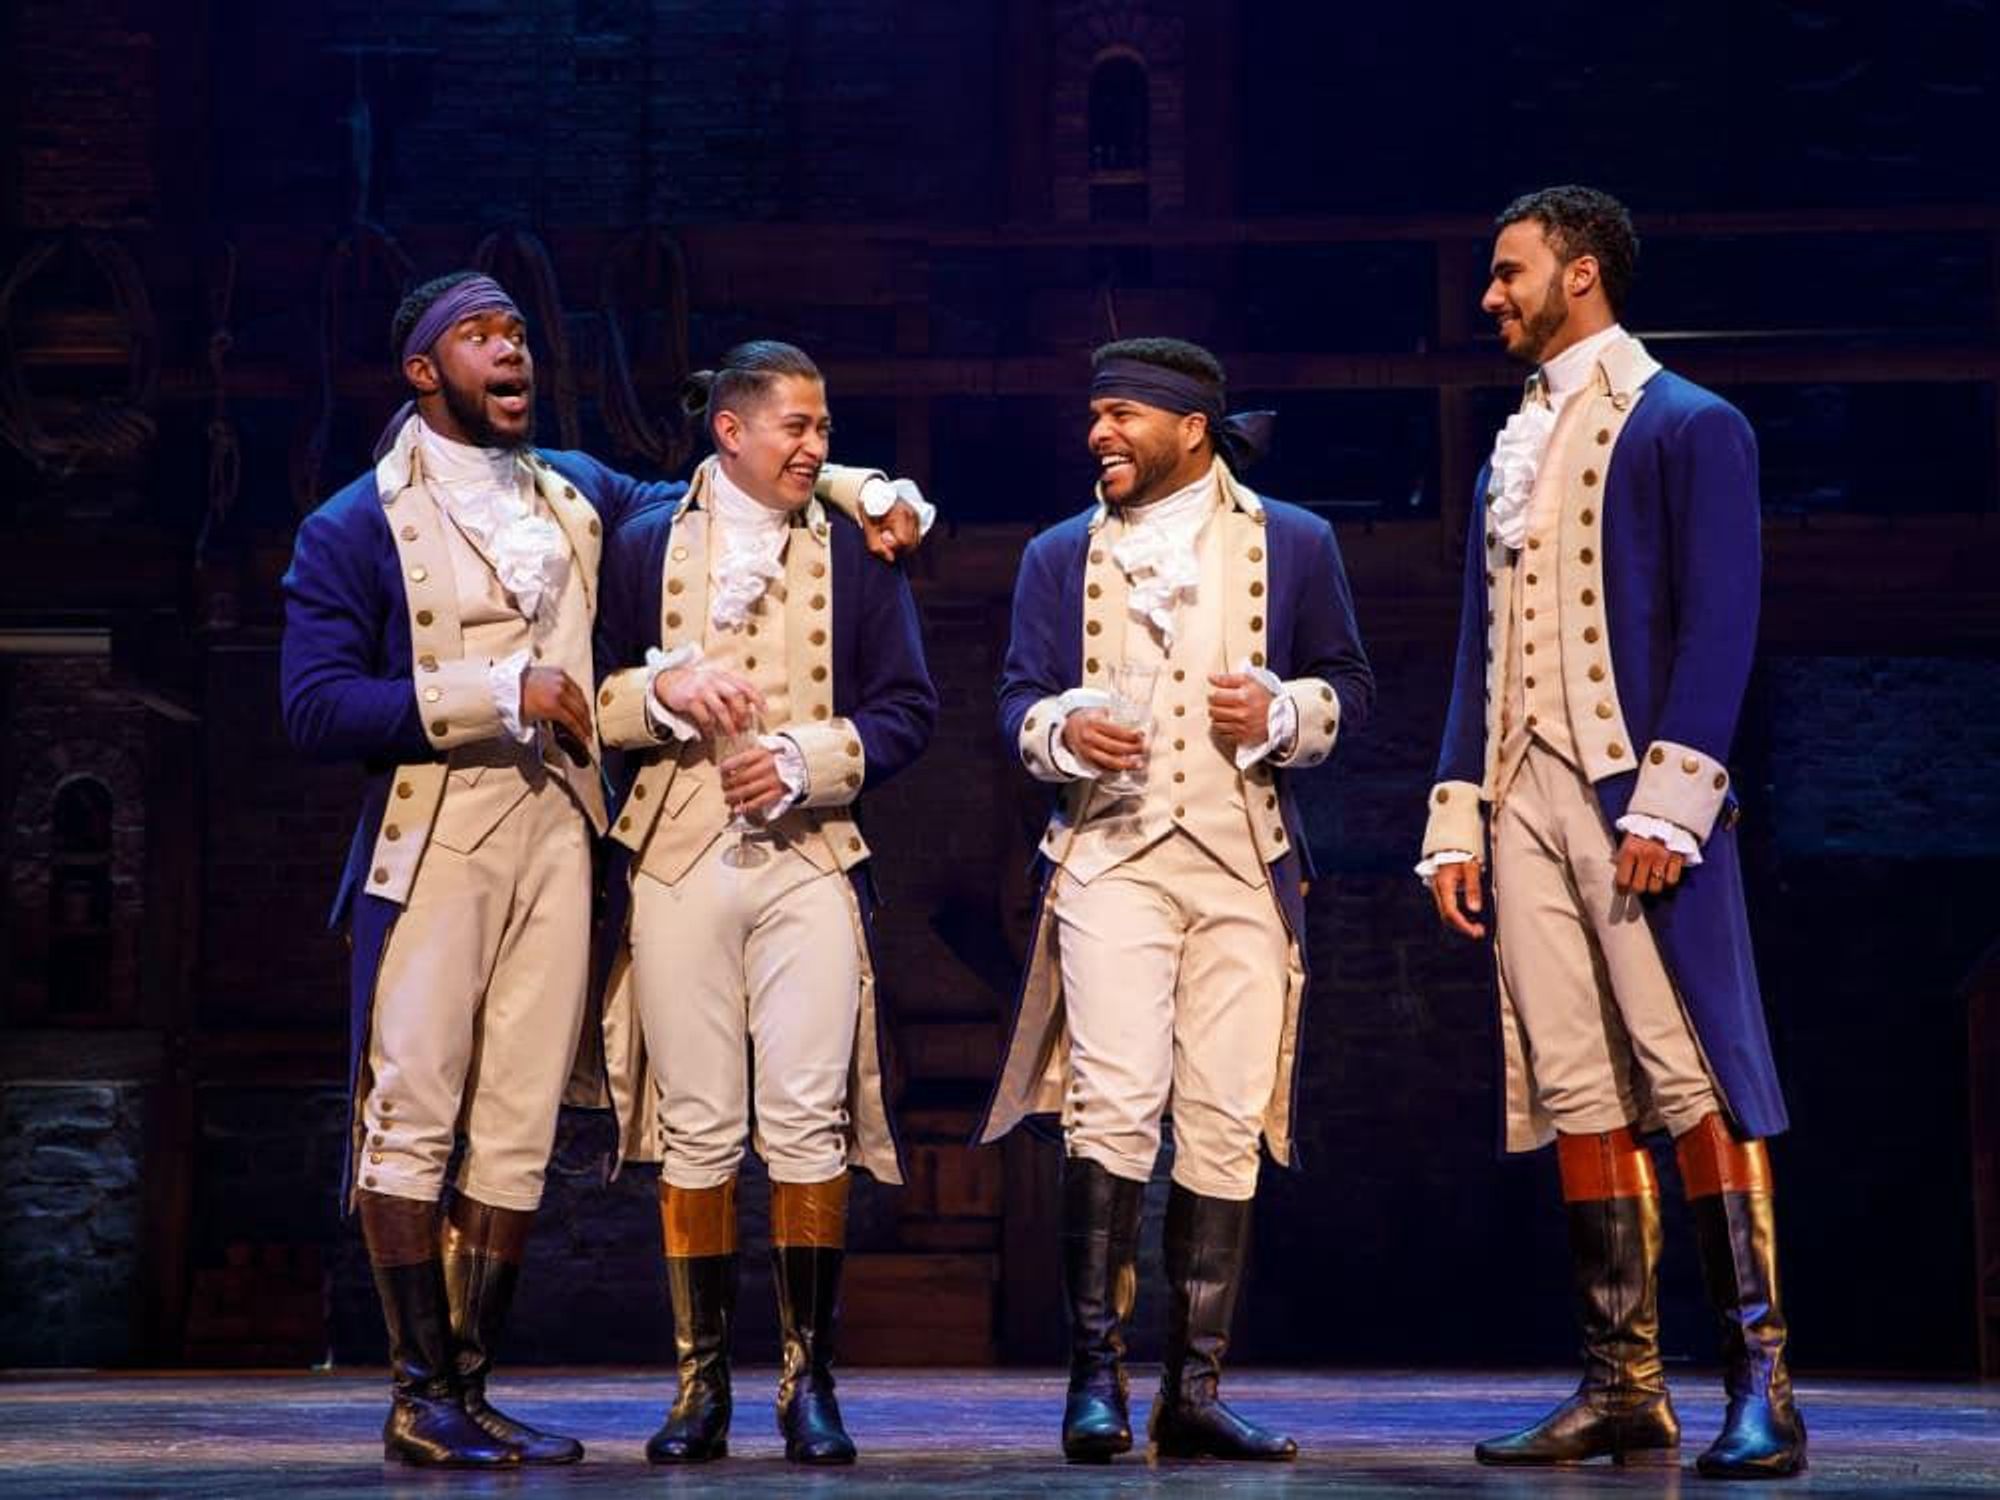 The revolutionary musical Hamilton is back at the Hobby Center this month.